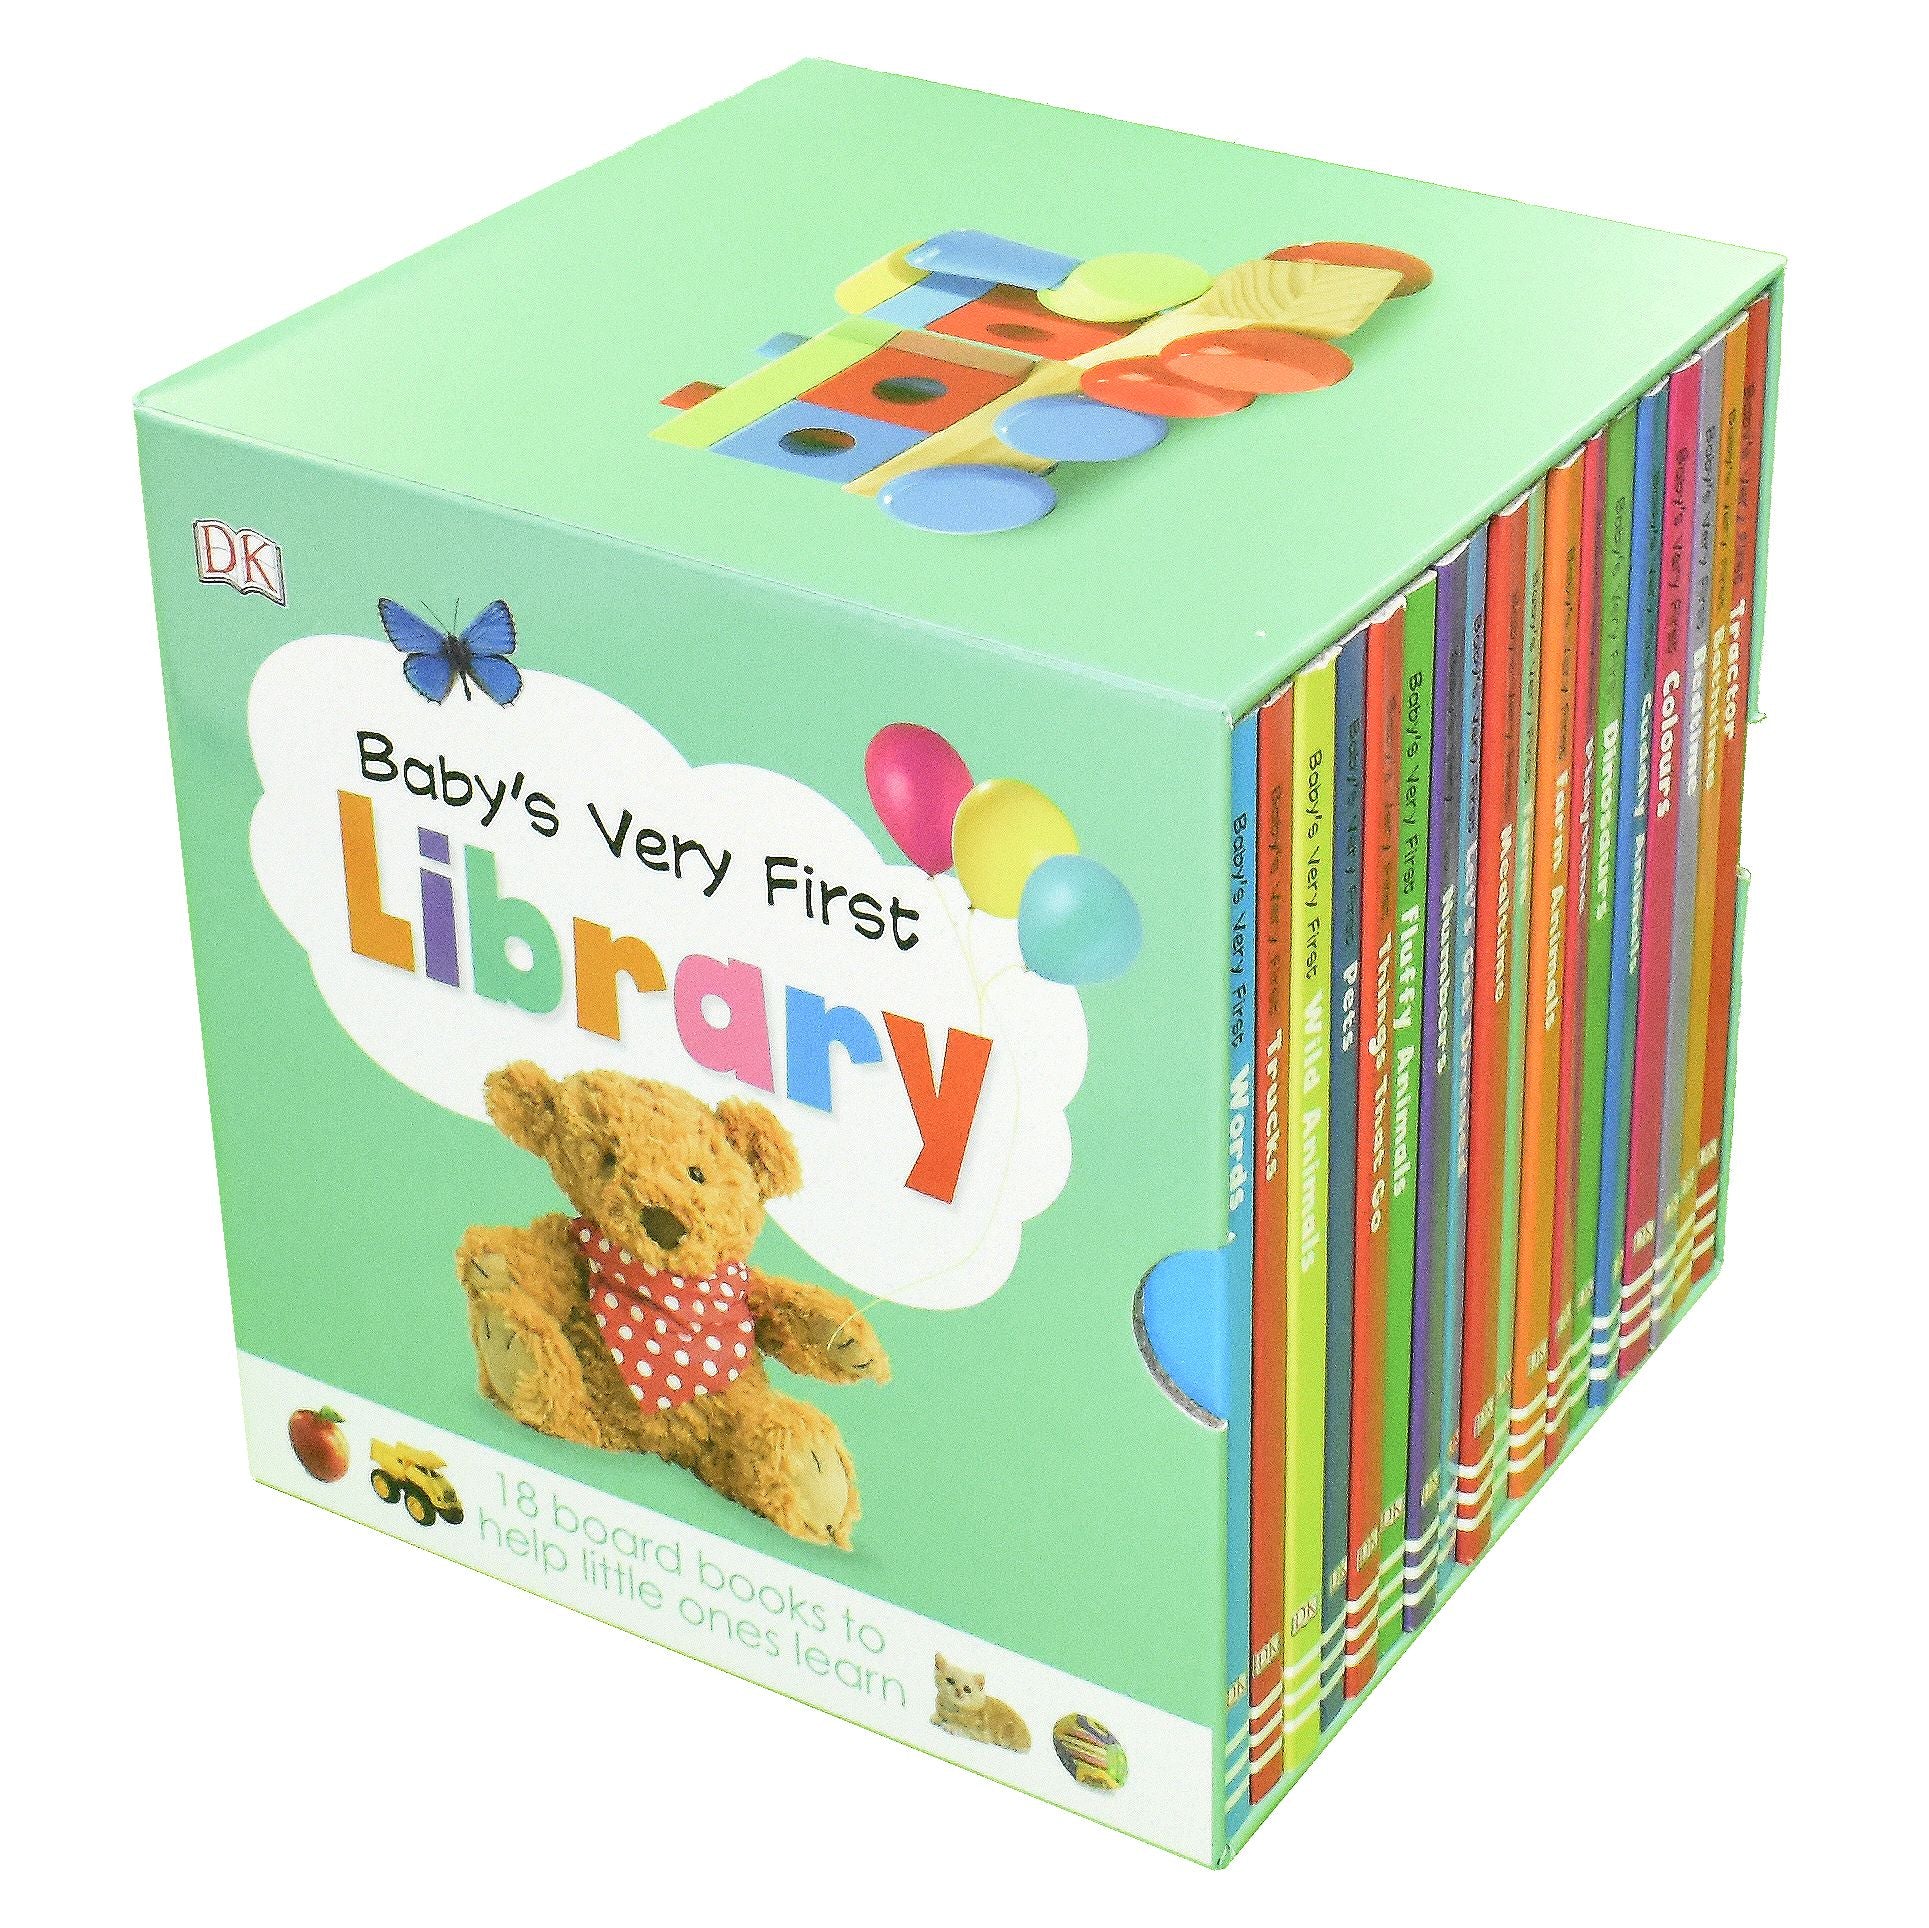 Baby's Very First Library By DK 18 Board Books Set- Ages 0-5 - Board Books